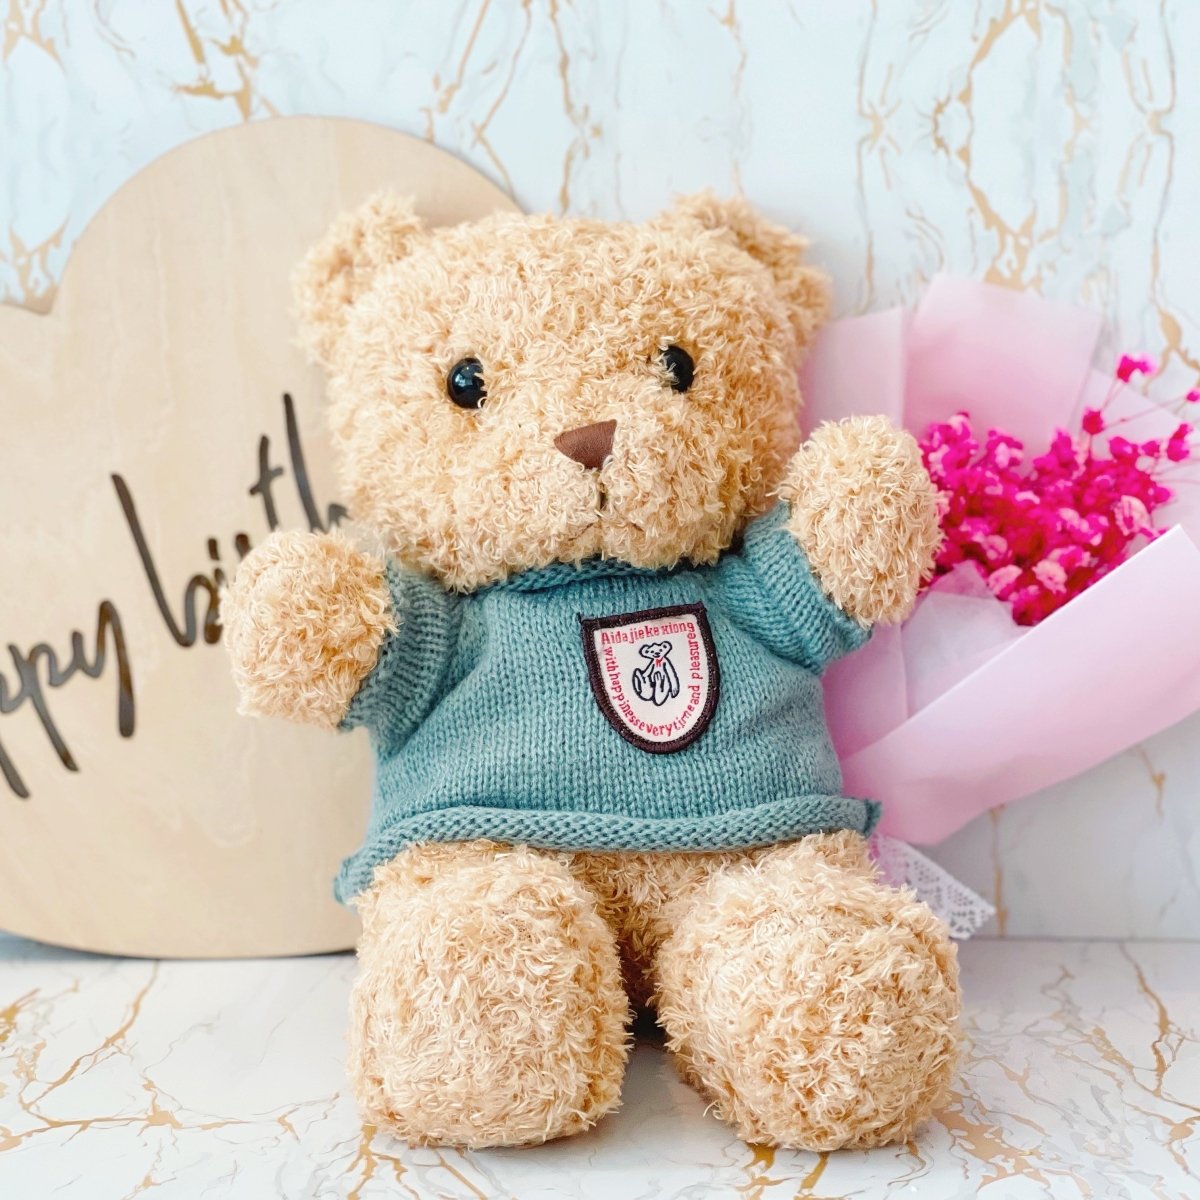 Classic Teddy Bear and Flowers (Includes Mini Dried Preserved Flower Bouquet) - Rainbowly Fresh Fruit Gift and Flower Arrangments